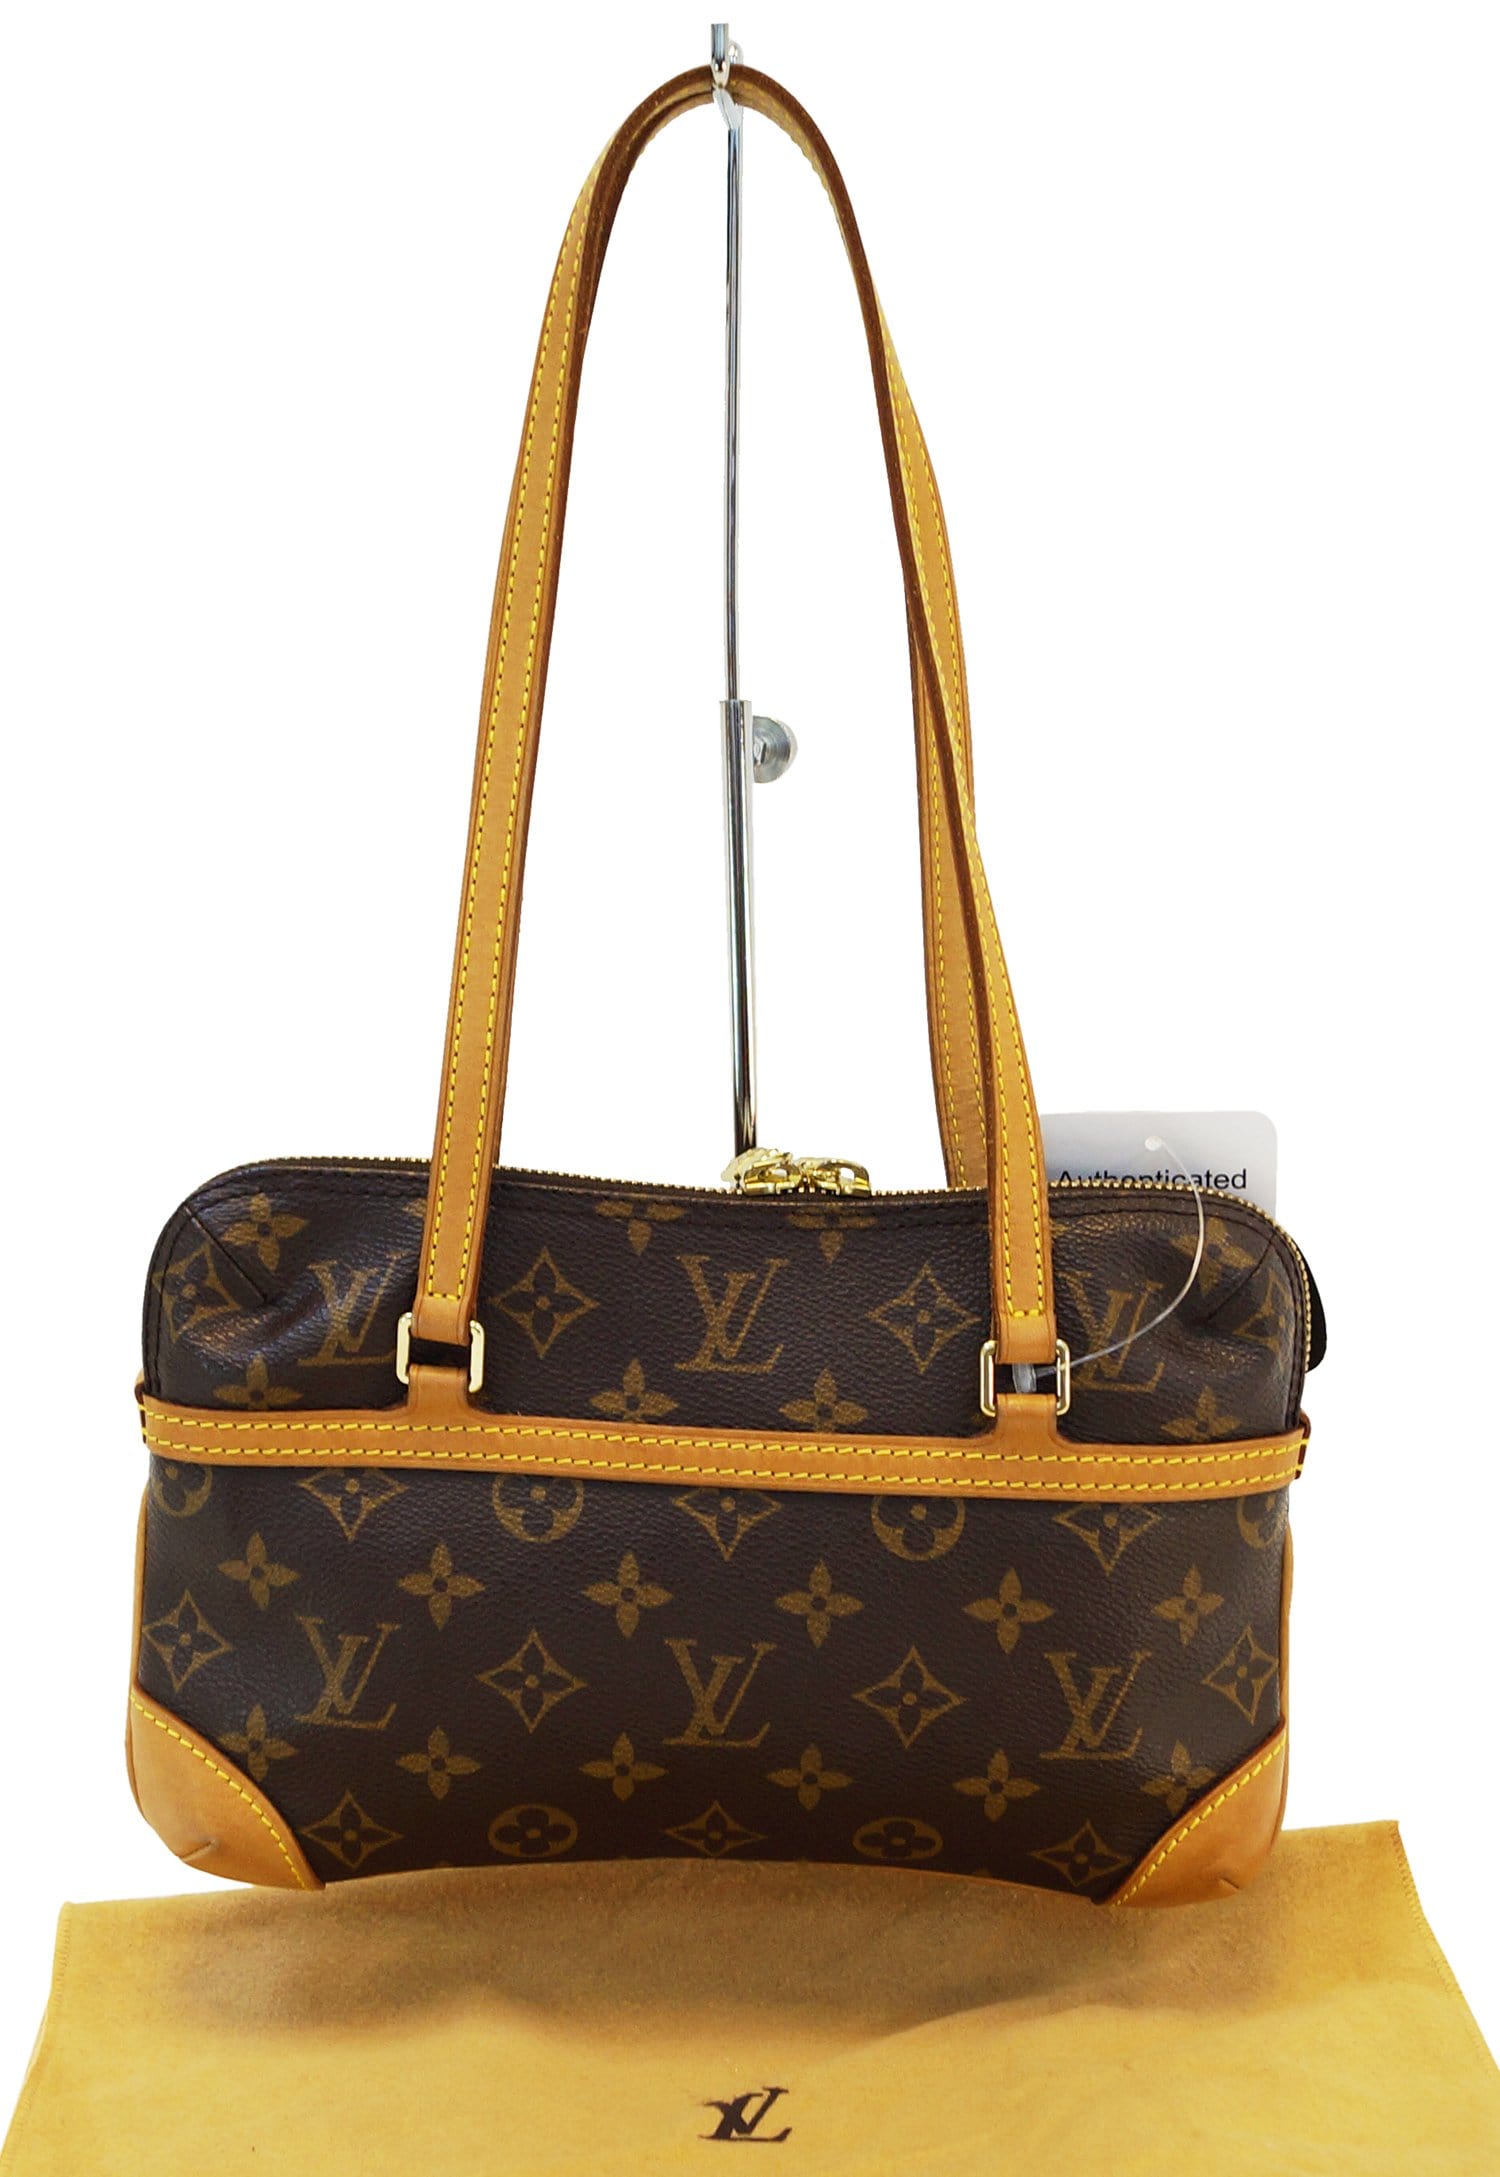 Louis Vuitton - Authenticated Purse - Yellow for Women, Good Condition